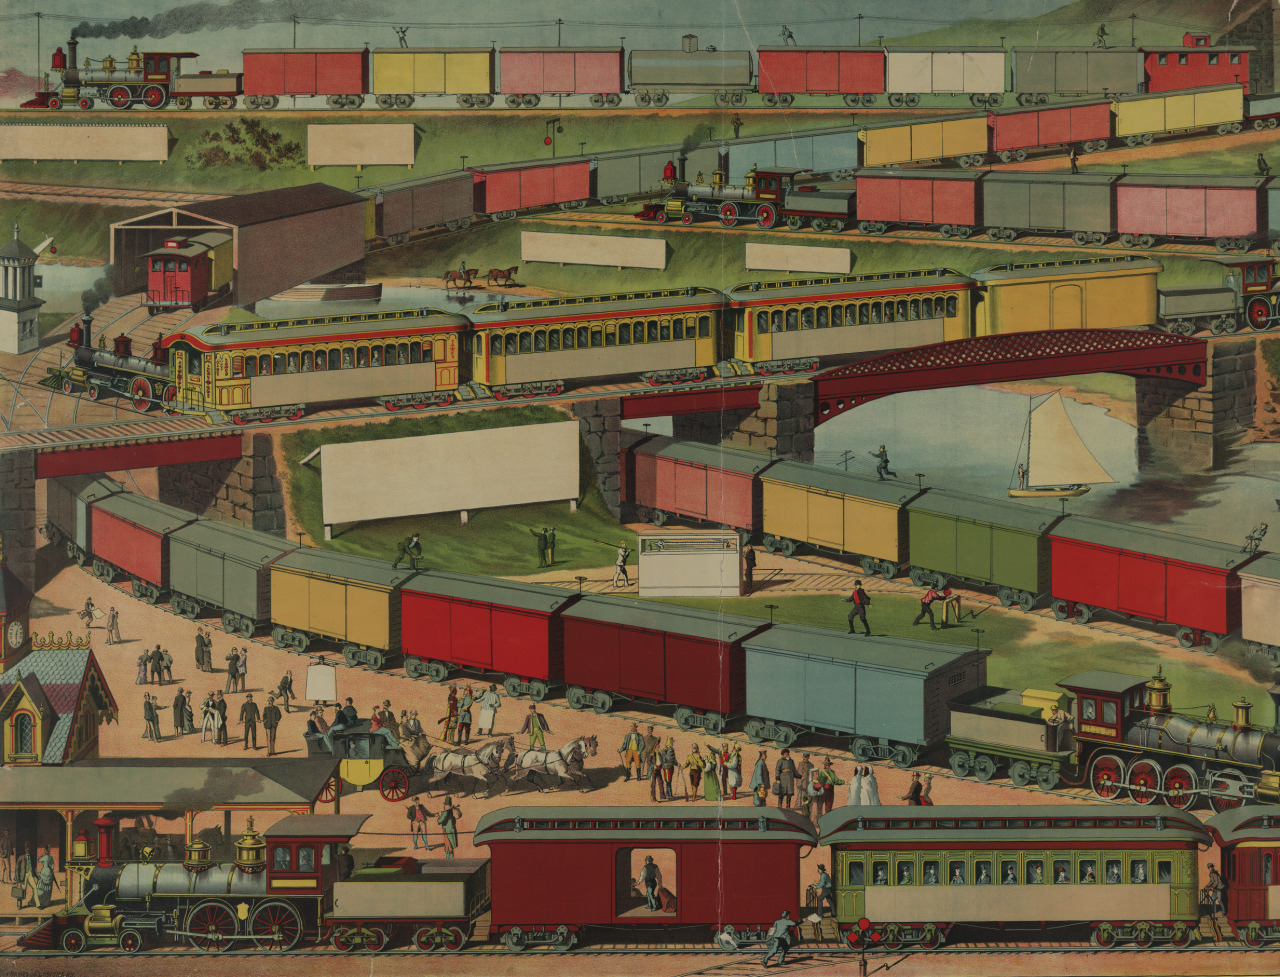 magictransistor: Forbes Albertype Co. Zig-Zag Passenger and Freight Train. 1885.